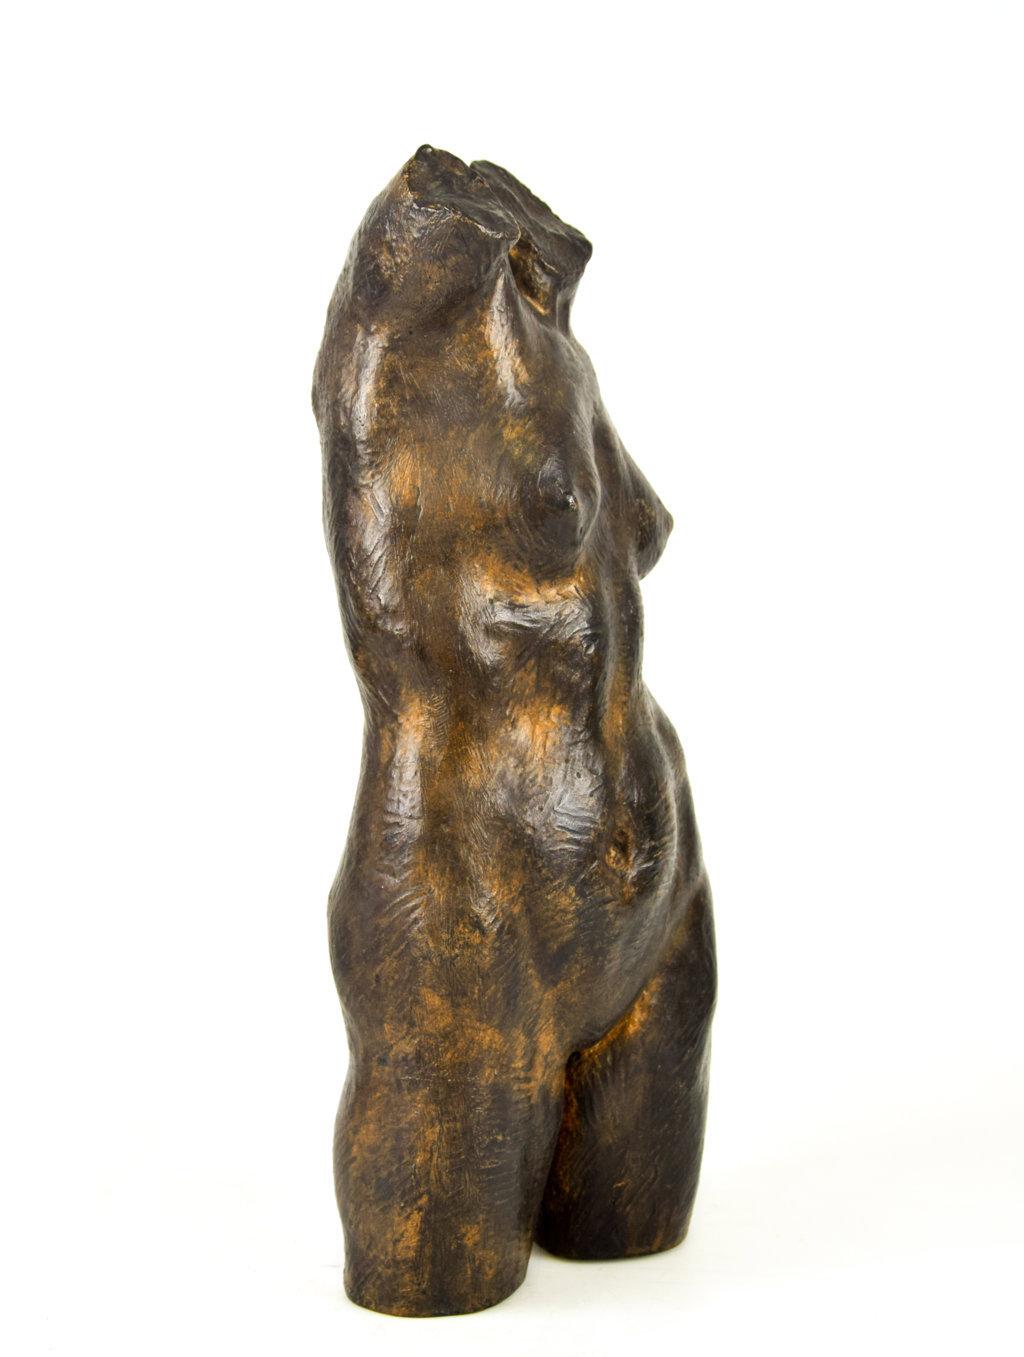 This female bust is an original bronze sculpture realized in the 1930s by Aurelio Mistruzzi

Signature of the artist engraved on the lower part of the sculpture.
Numbered on the lower part. 35/100.

Collect this very important specimen realized